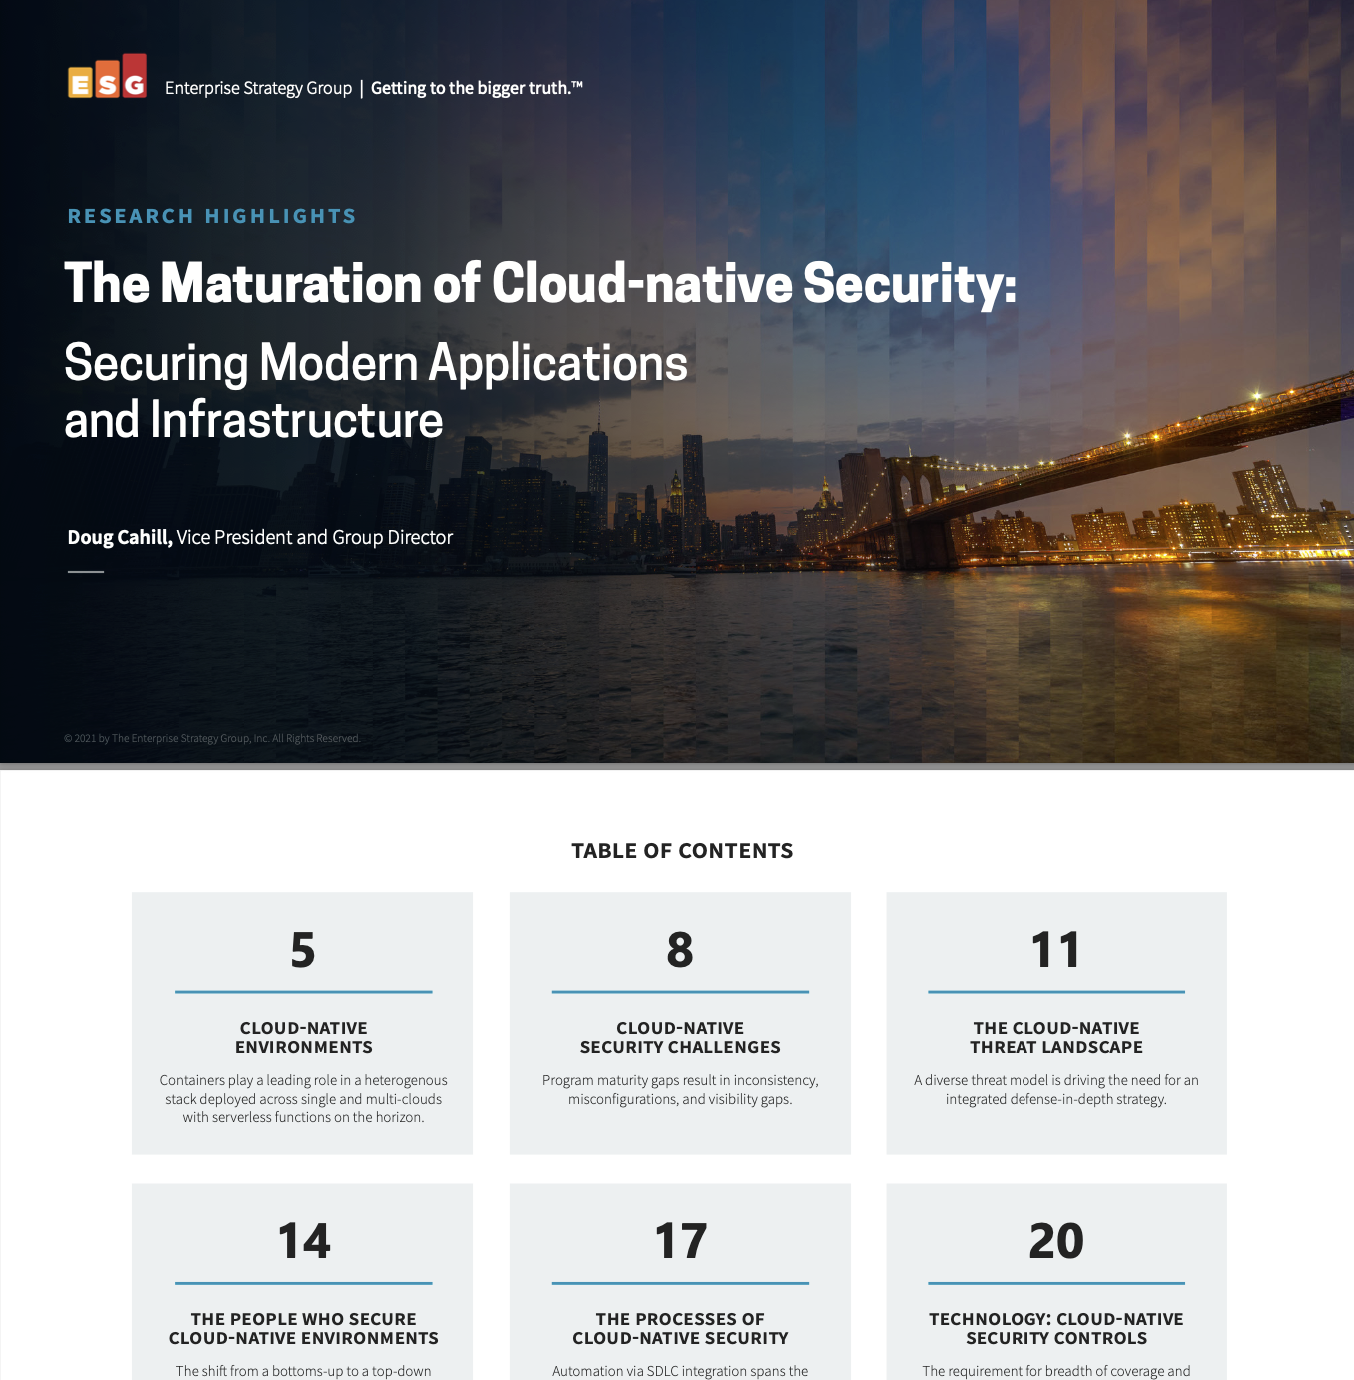 The Maturation of Cloud-native Security: Securing Modern Applications and Infrastructure